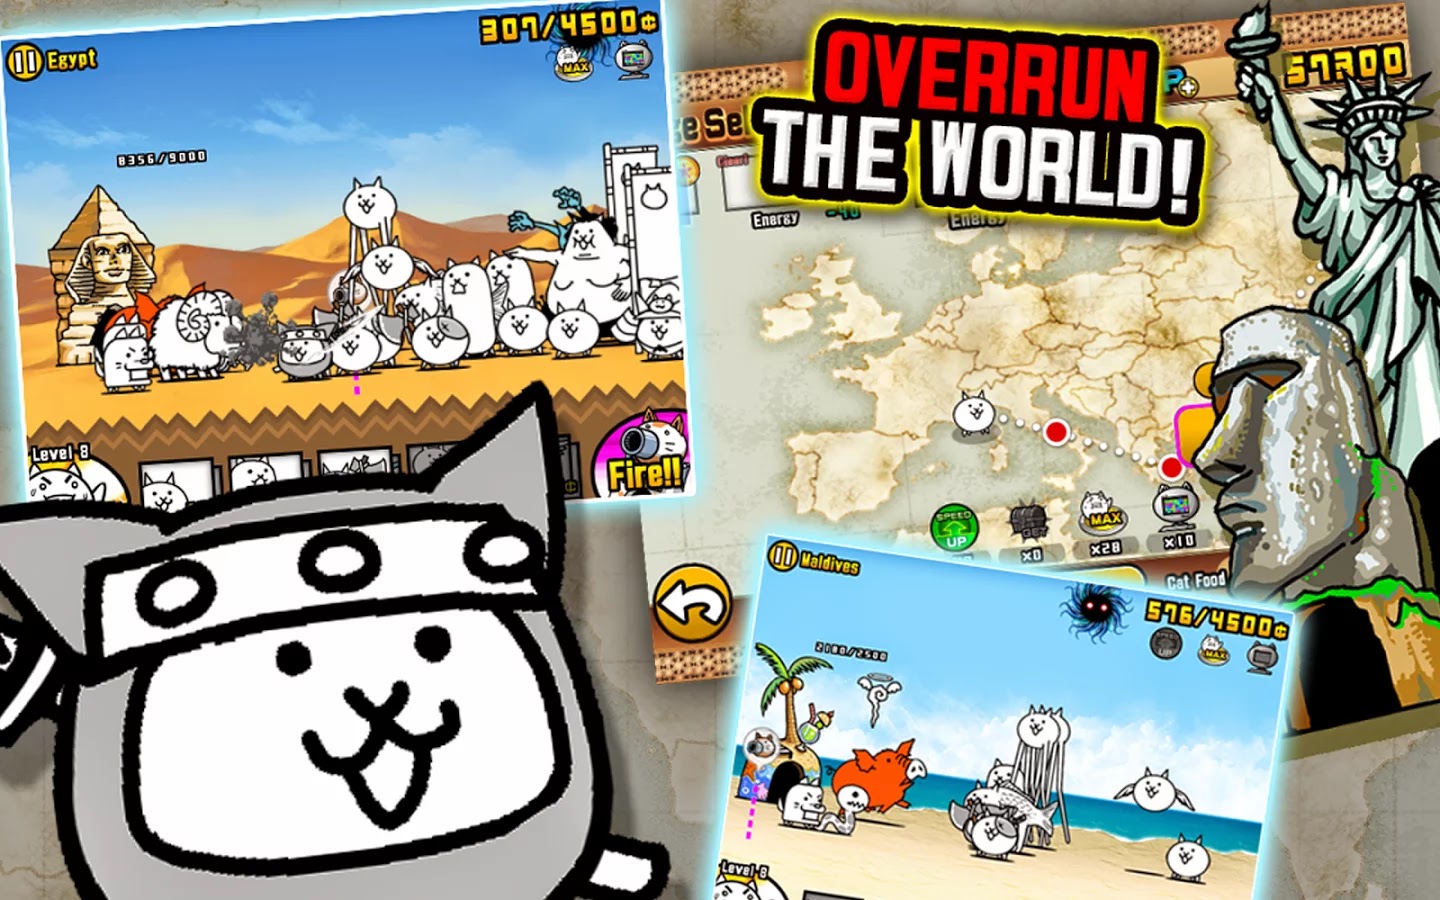 Download The Battle Cats Mod APK V1.3.0 Unlimited Food and Xp Android